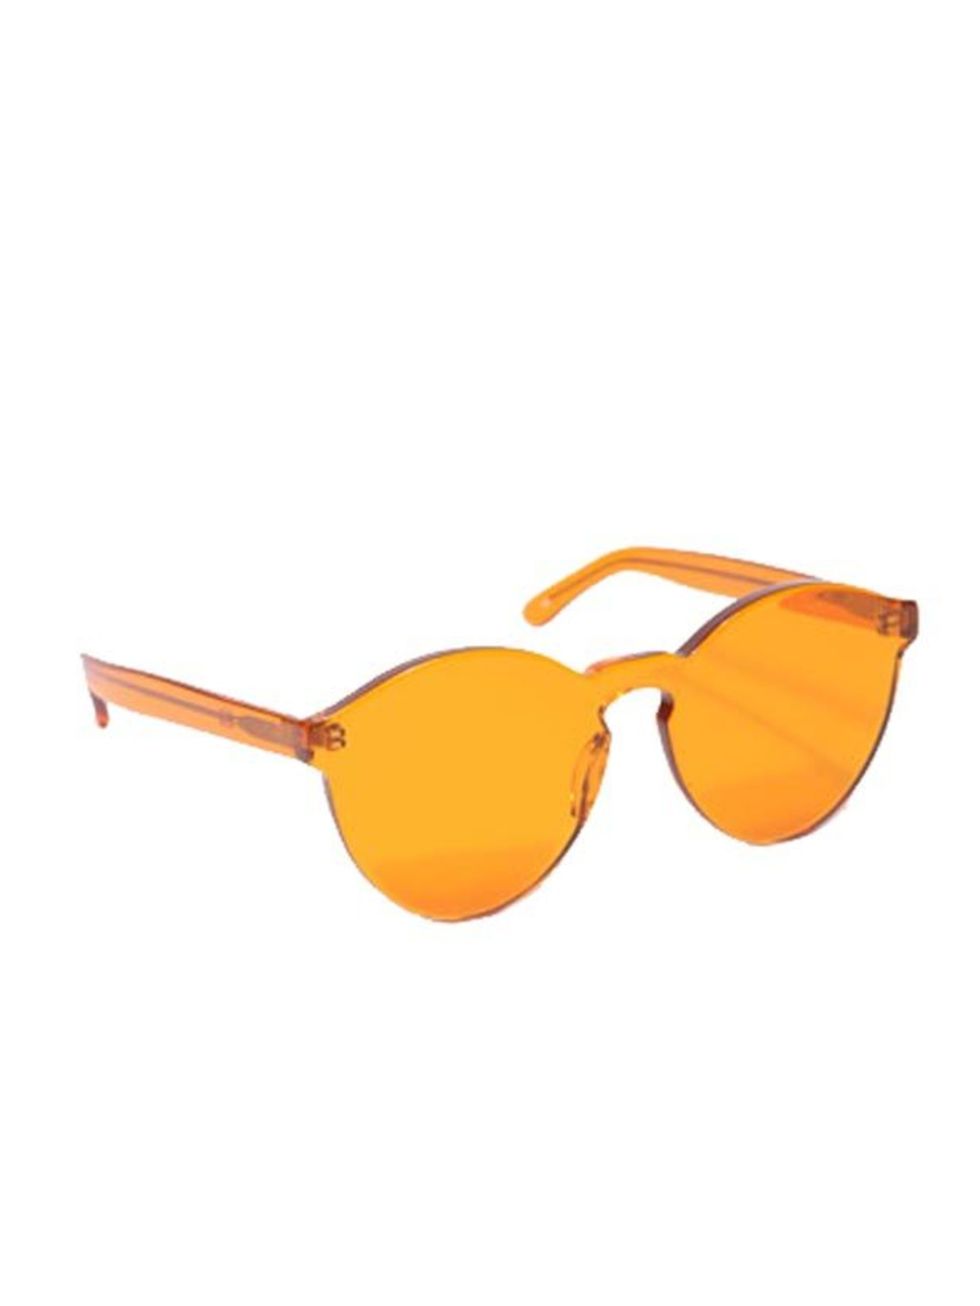 <p>From a day in the park to partying at summers festivals, these sunglasses will add a lick of fun, kitsch colour to seasonal activities Henry Holland x Linda Farrow orange sunglasses, £141, at <a href="http://www.urbanoutfitters.co.uk/henry-holland-x-